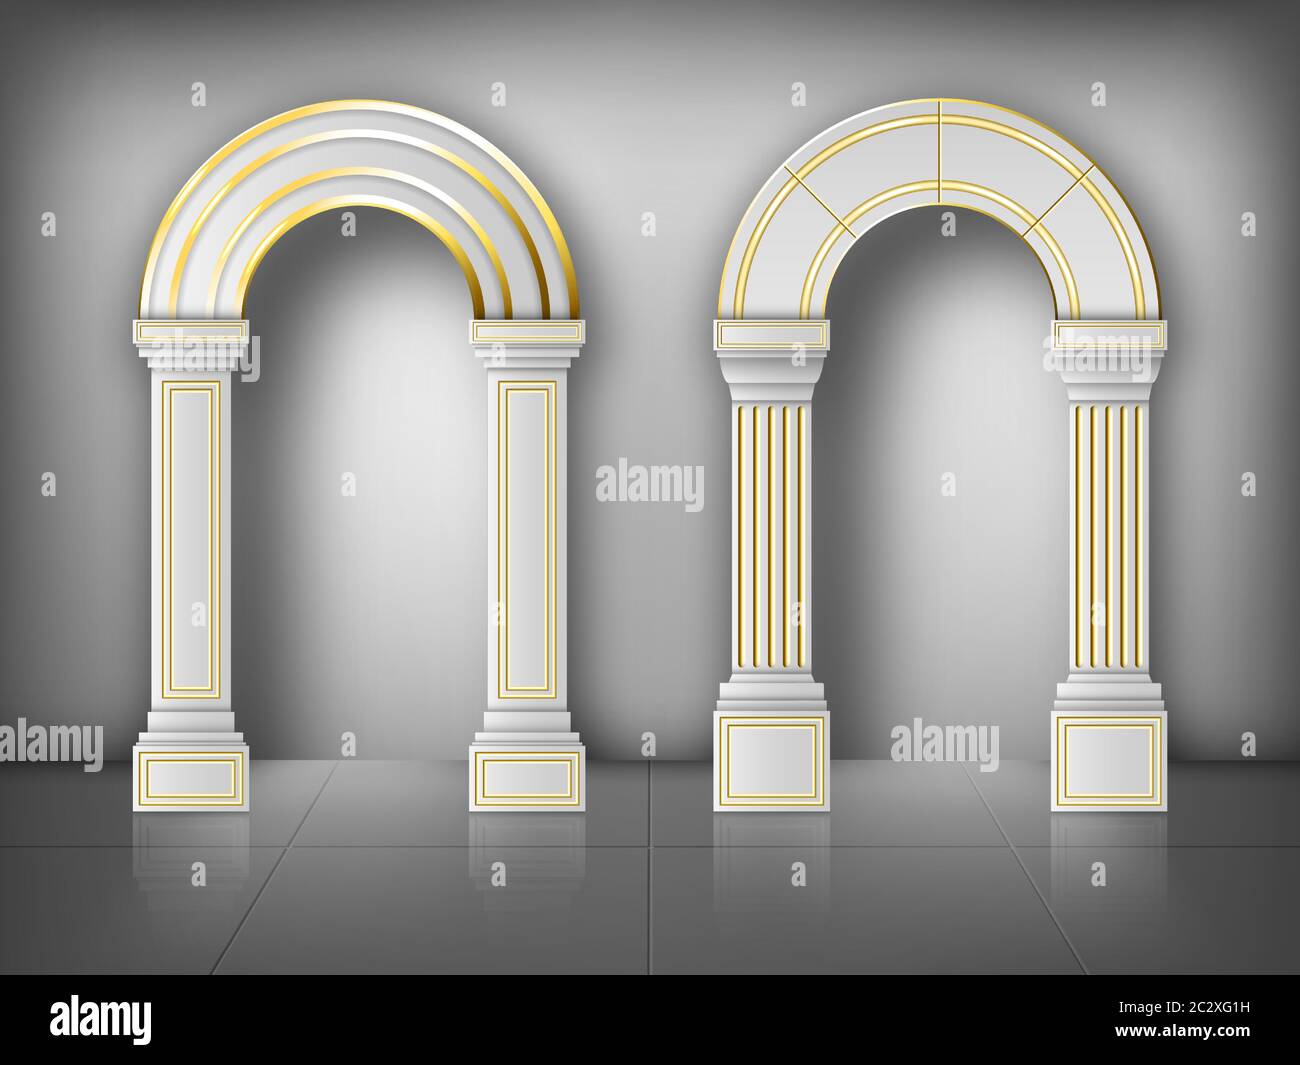 Arches with columns in wall, interior gates with white pillars and gold decoration in palace or castle. Archway frames, portal entrance, antique doorw Stock Vector